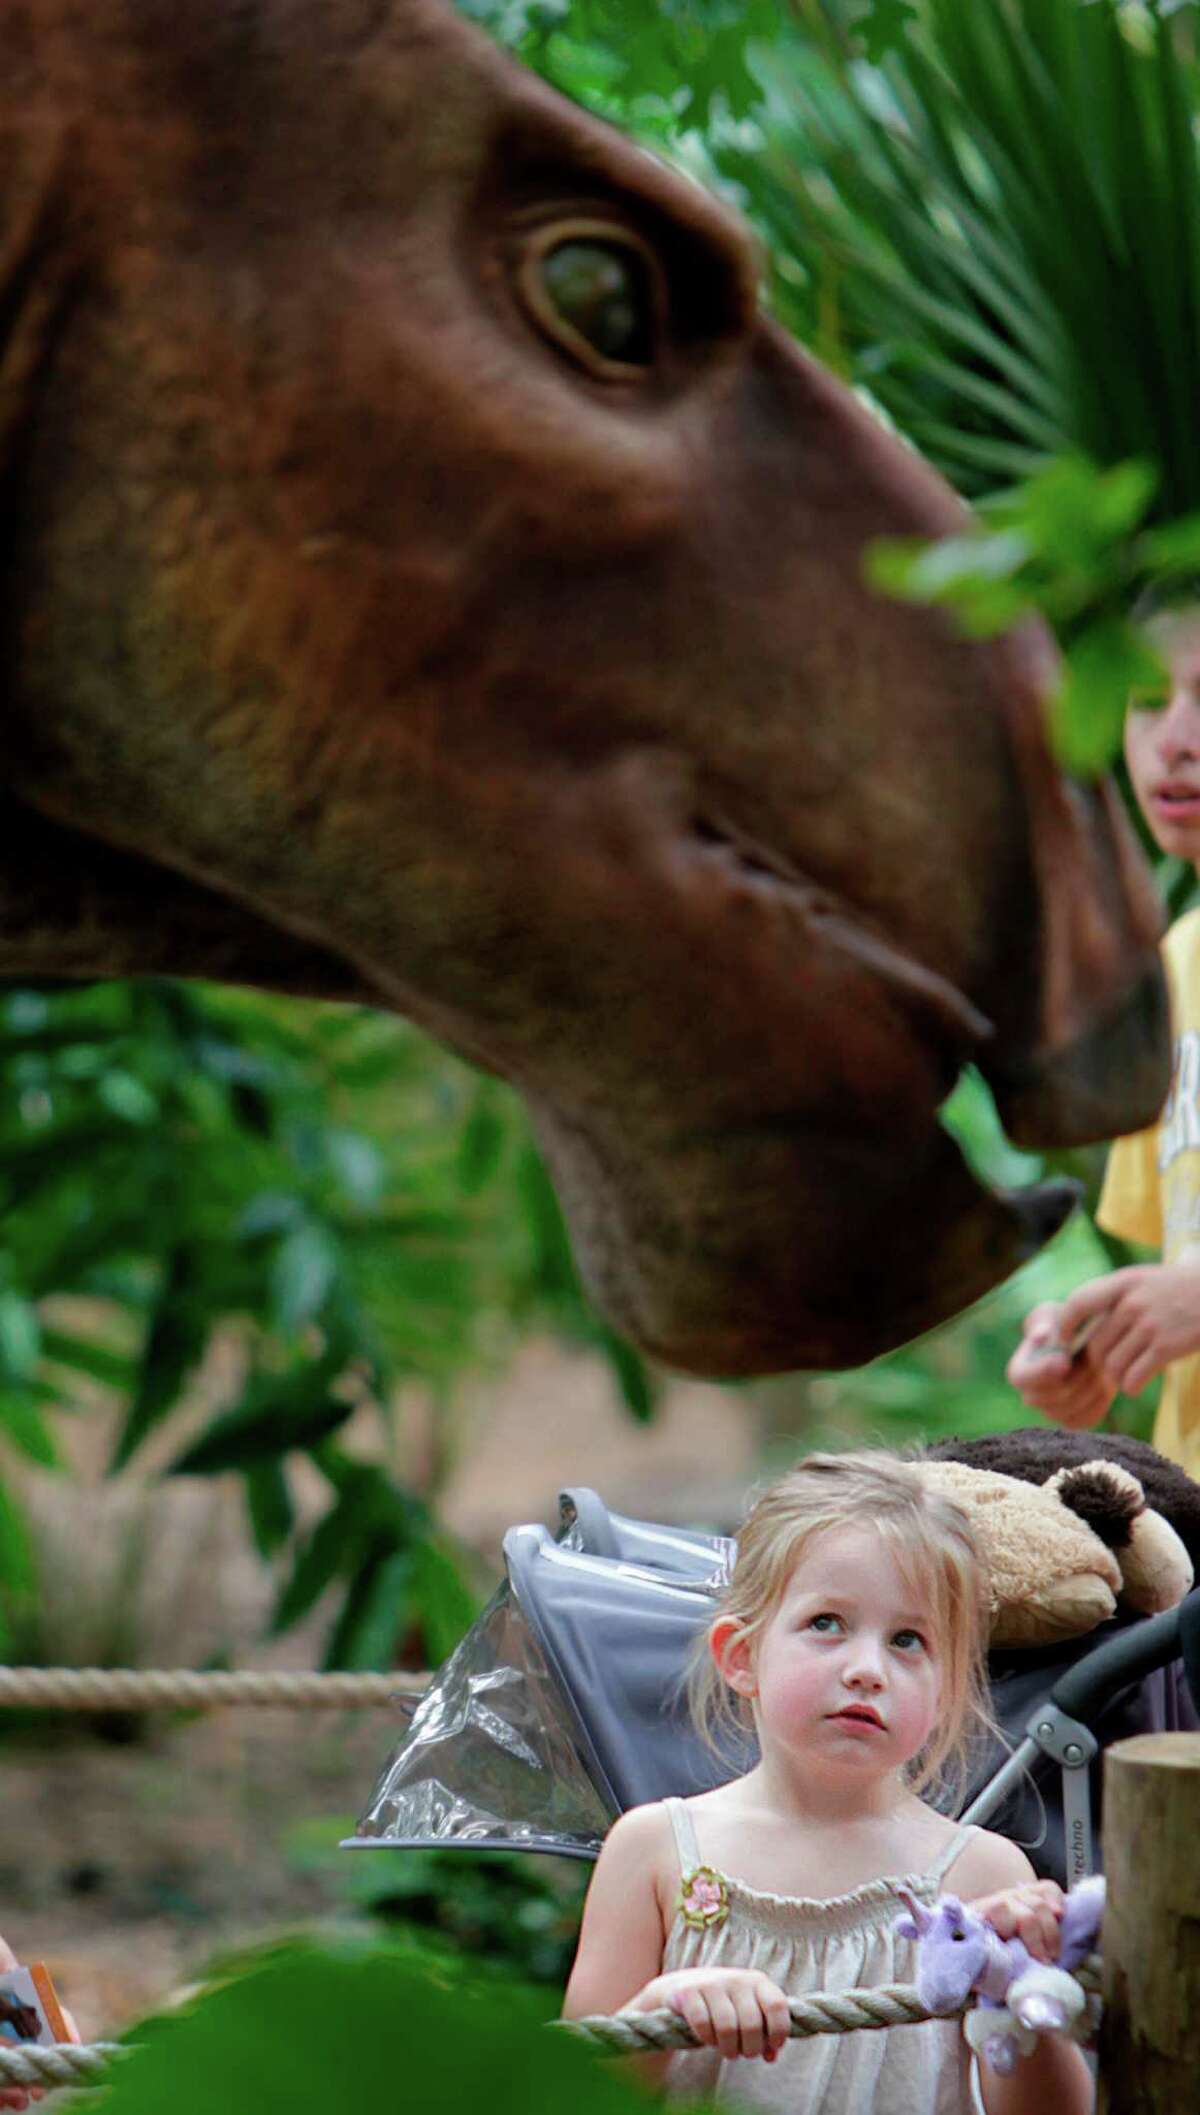 Peyton Holland, 4, cautiously approaches a Protohadros dinosaur display as she visits the DINOSAURS! At the Houston Zoo exhibit on Friday, May 4, 2012, in Houston. The Protohadros is the oldest known duck-billed dinosaur and was discovered in North-Central Texas in 1995.